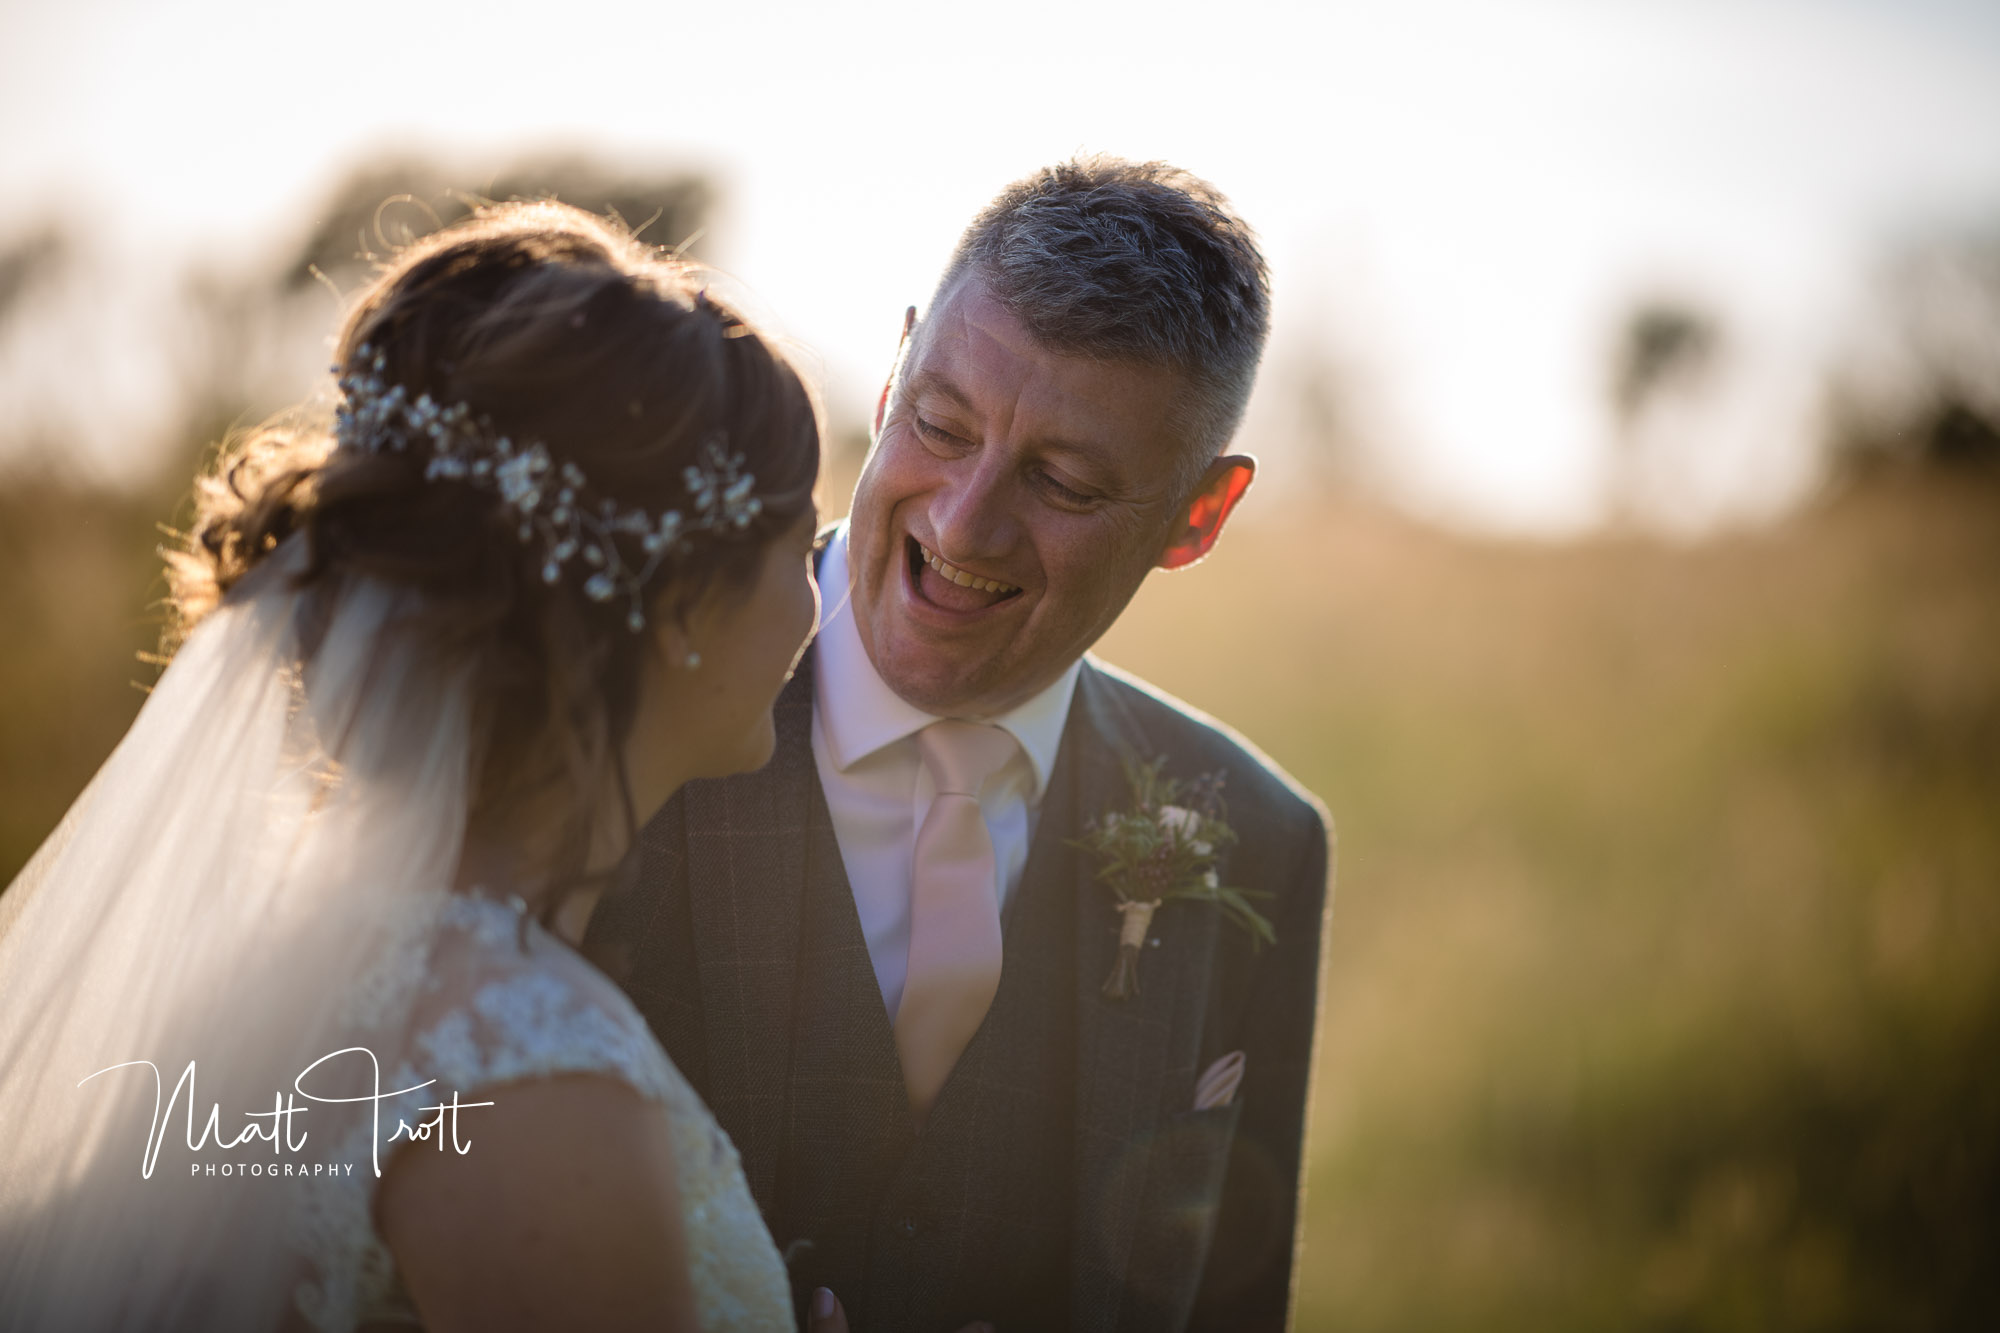 Groom laughing with bride as they walk across a field during their wedding day